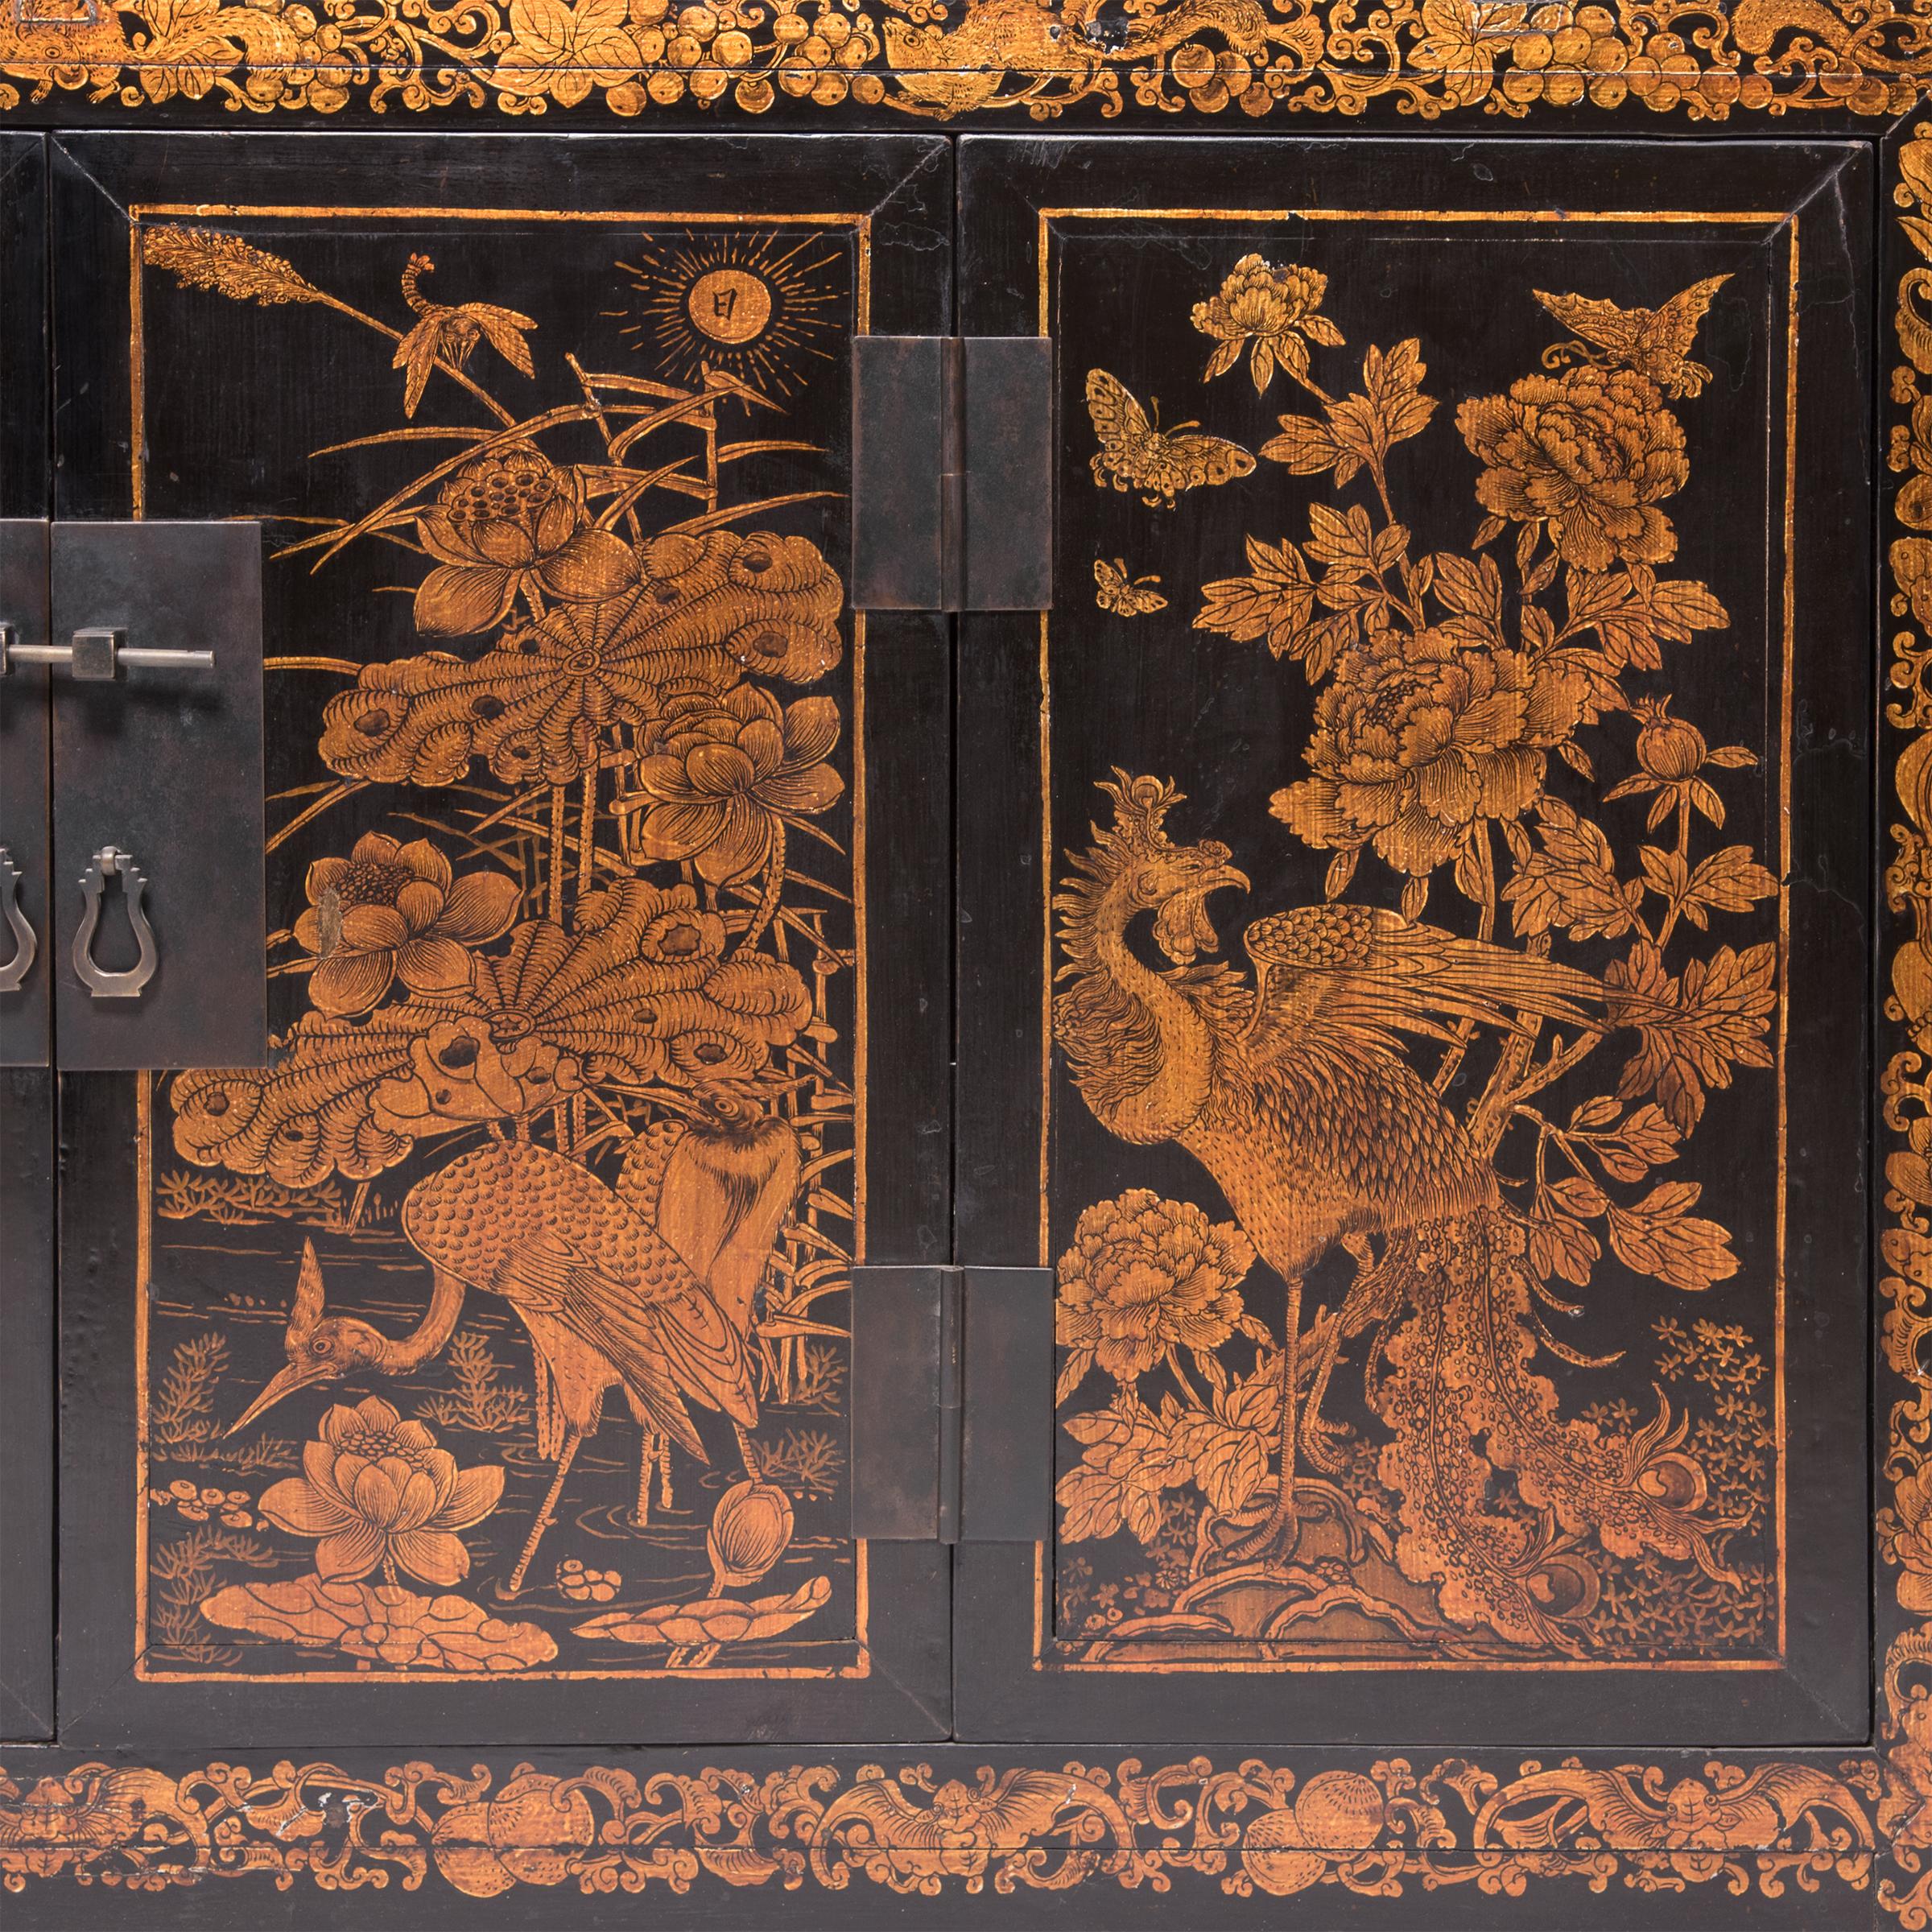 Qing Antique Chinese Gilt Lacquered Avian Coffer